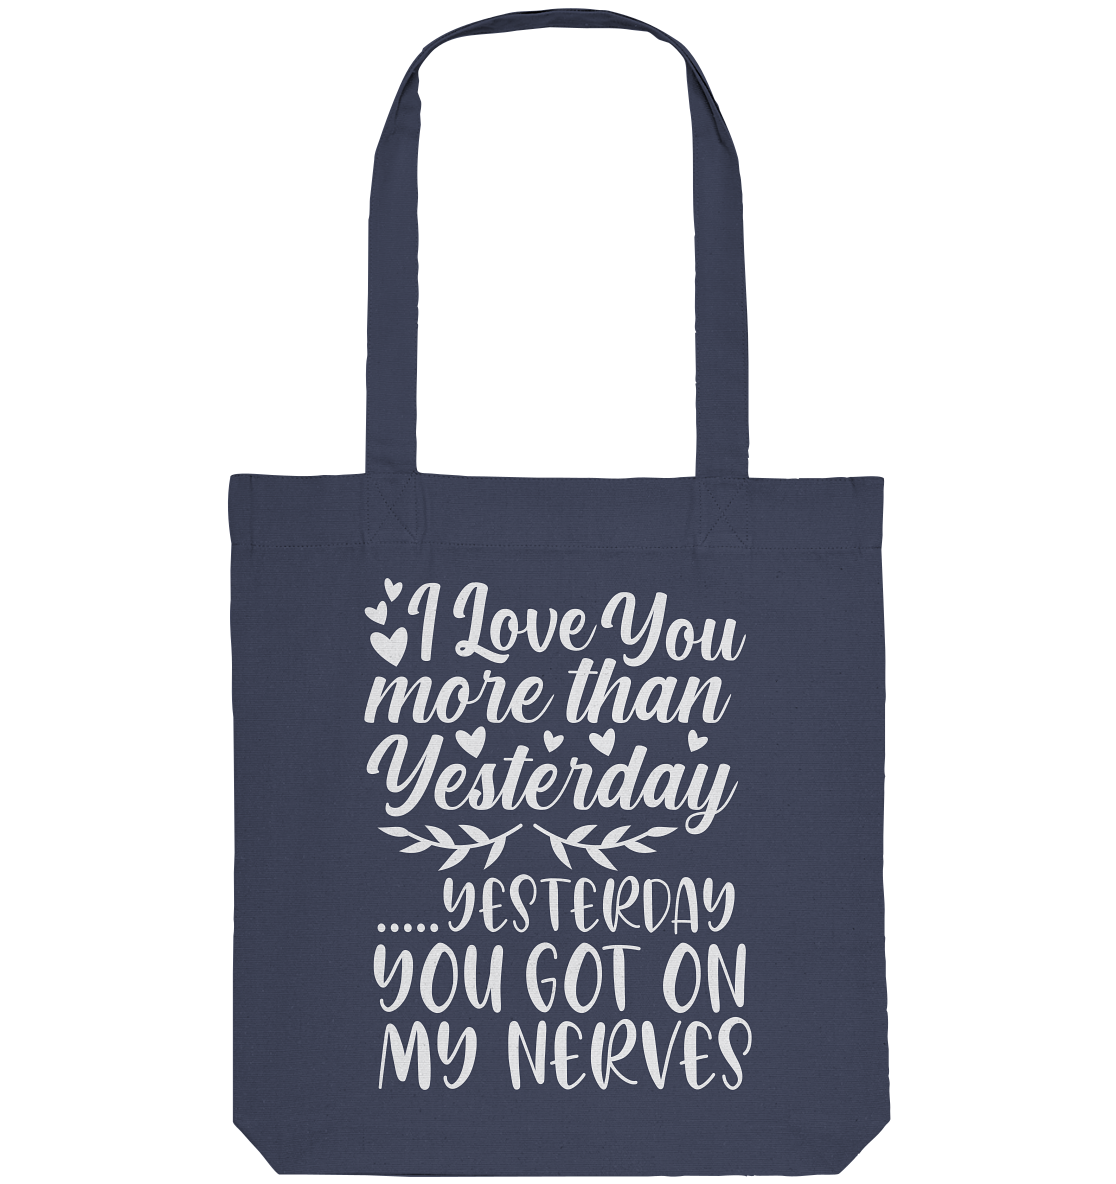 I love you more than yesterday - Organic Tote Bag